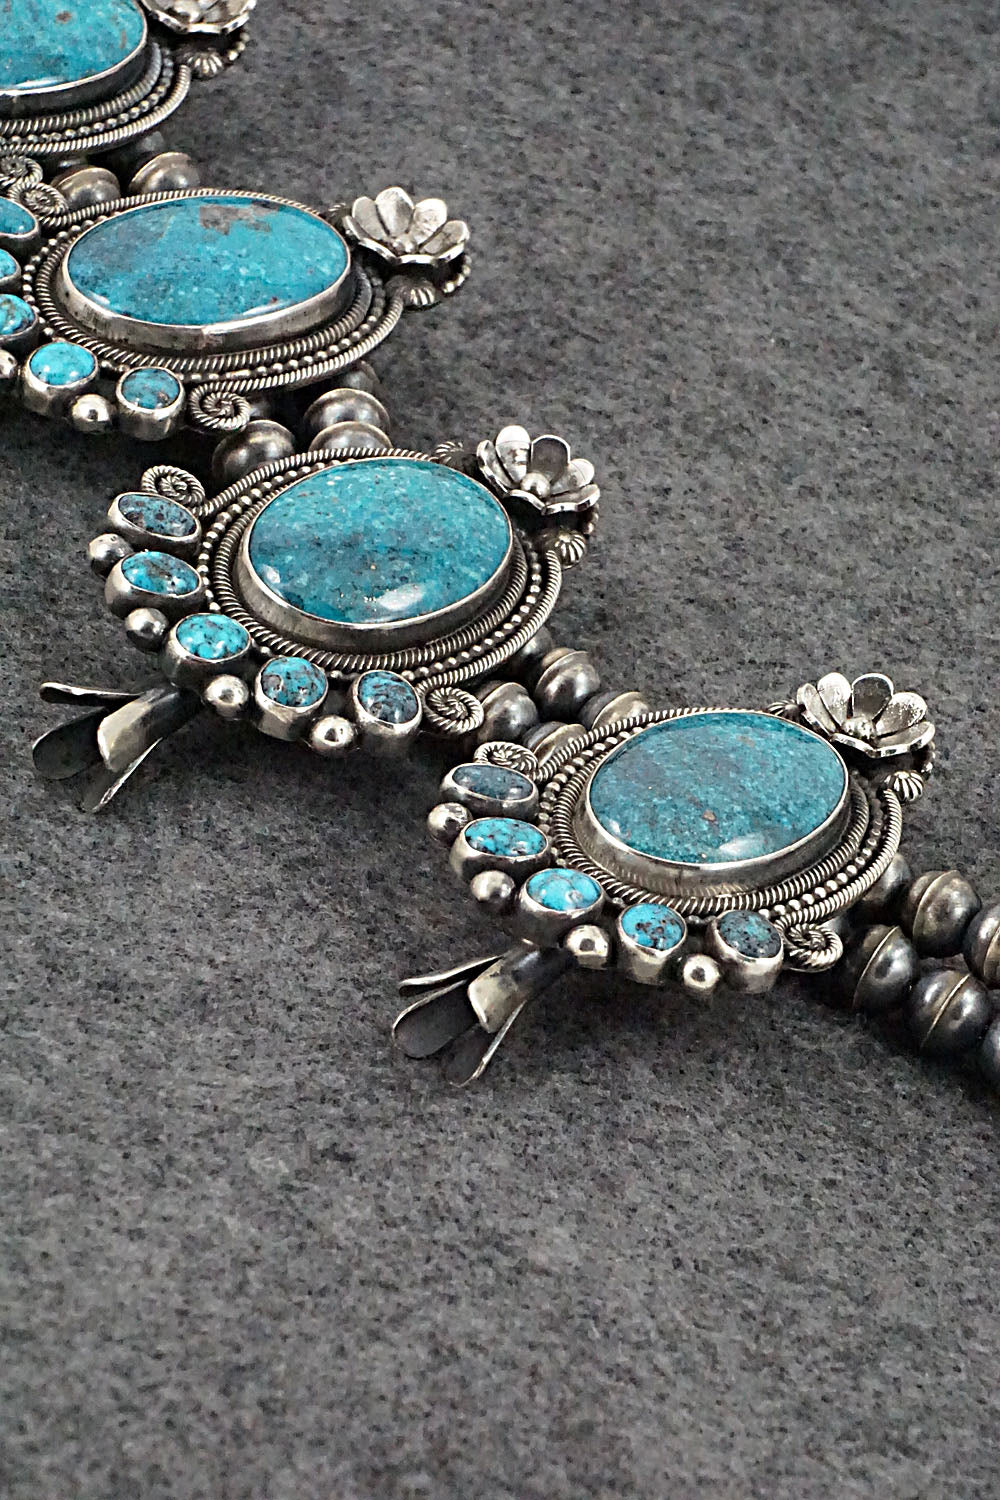 Turquoise & Sterling Silver Squash Blossom Necklace & Earrings - Myron Etsitty